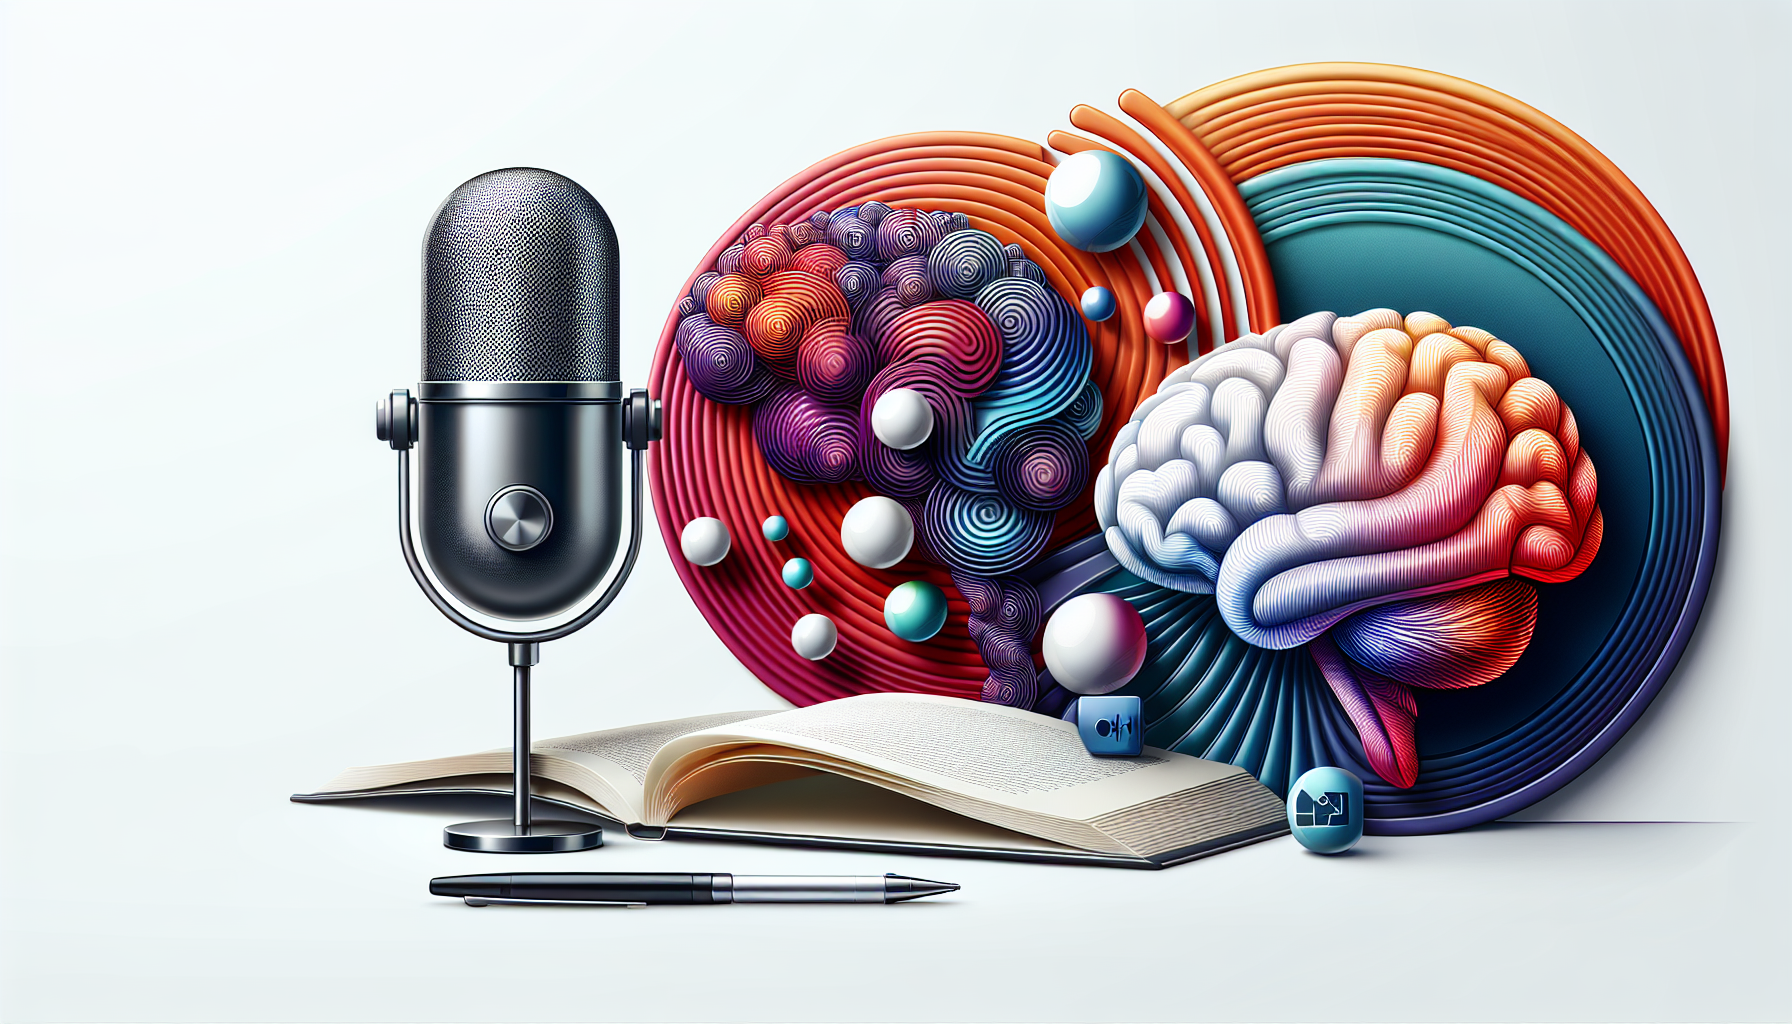 Create a cover image with a podcast microphone, a brain representing neurobiology, and a book repres